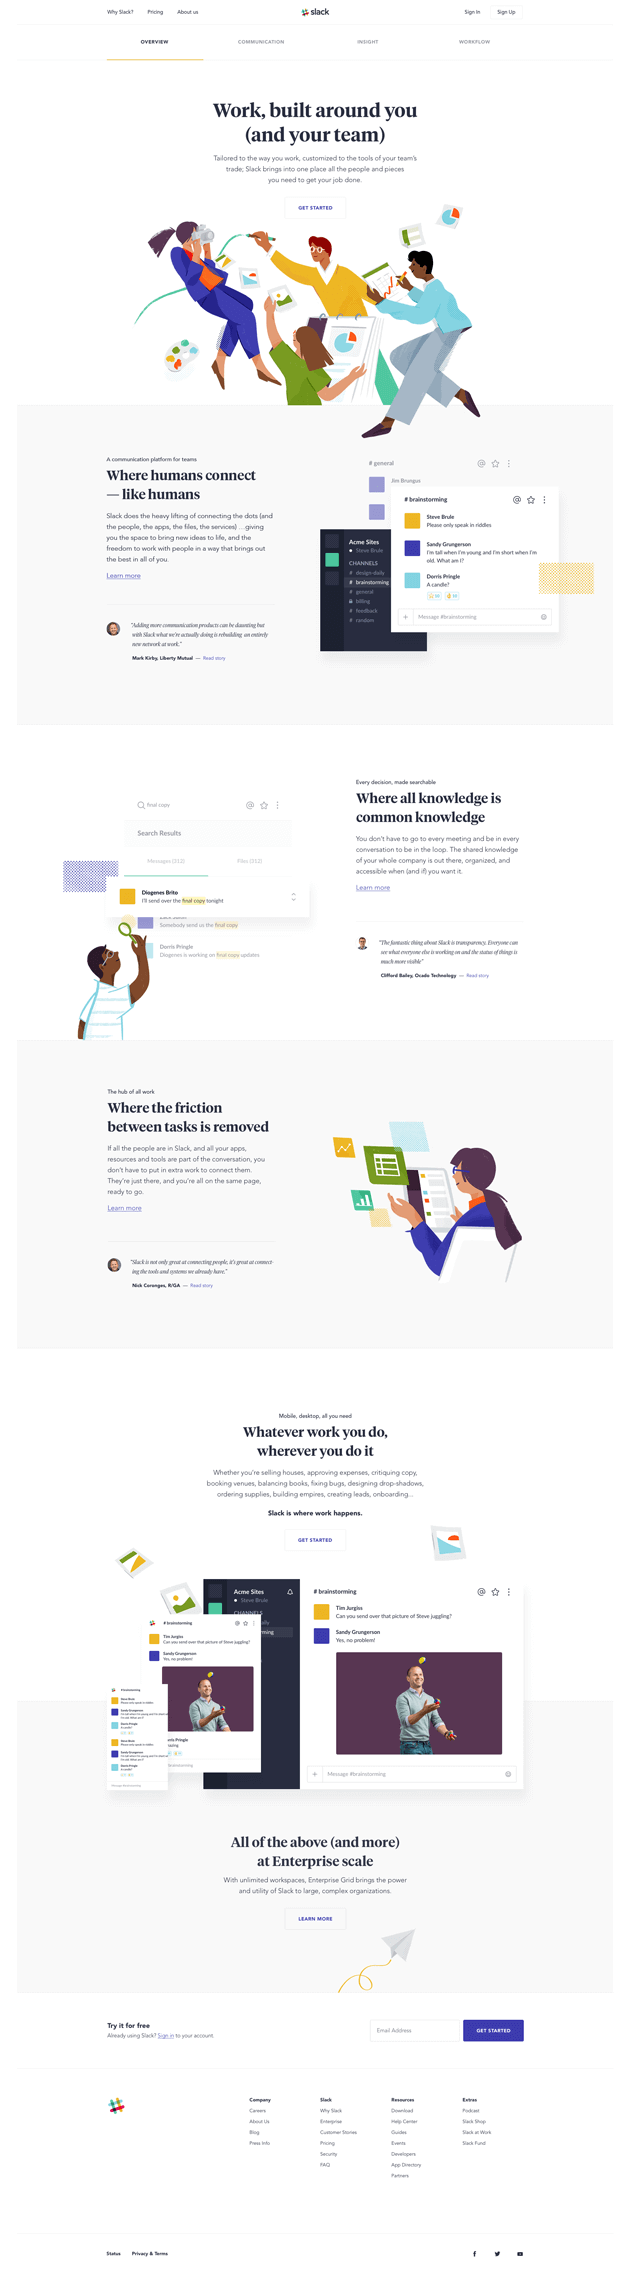 Website redesign for Slack company made by Ueno.co